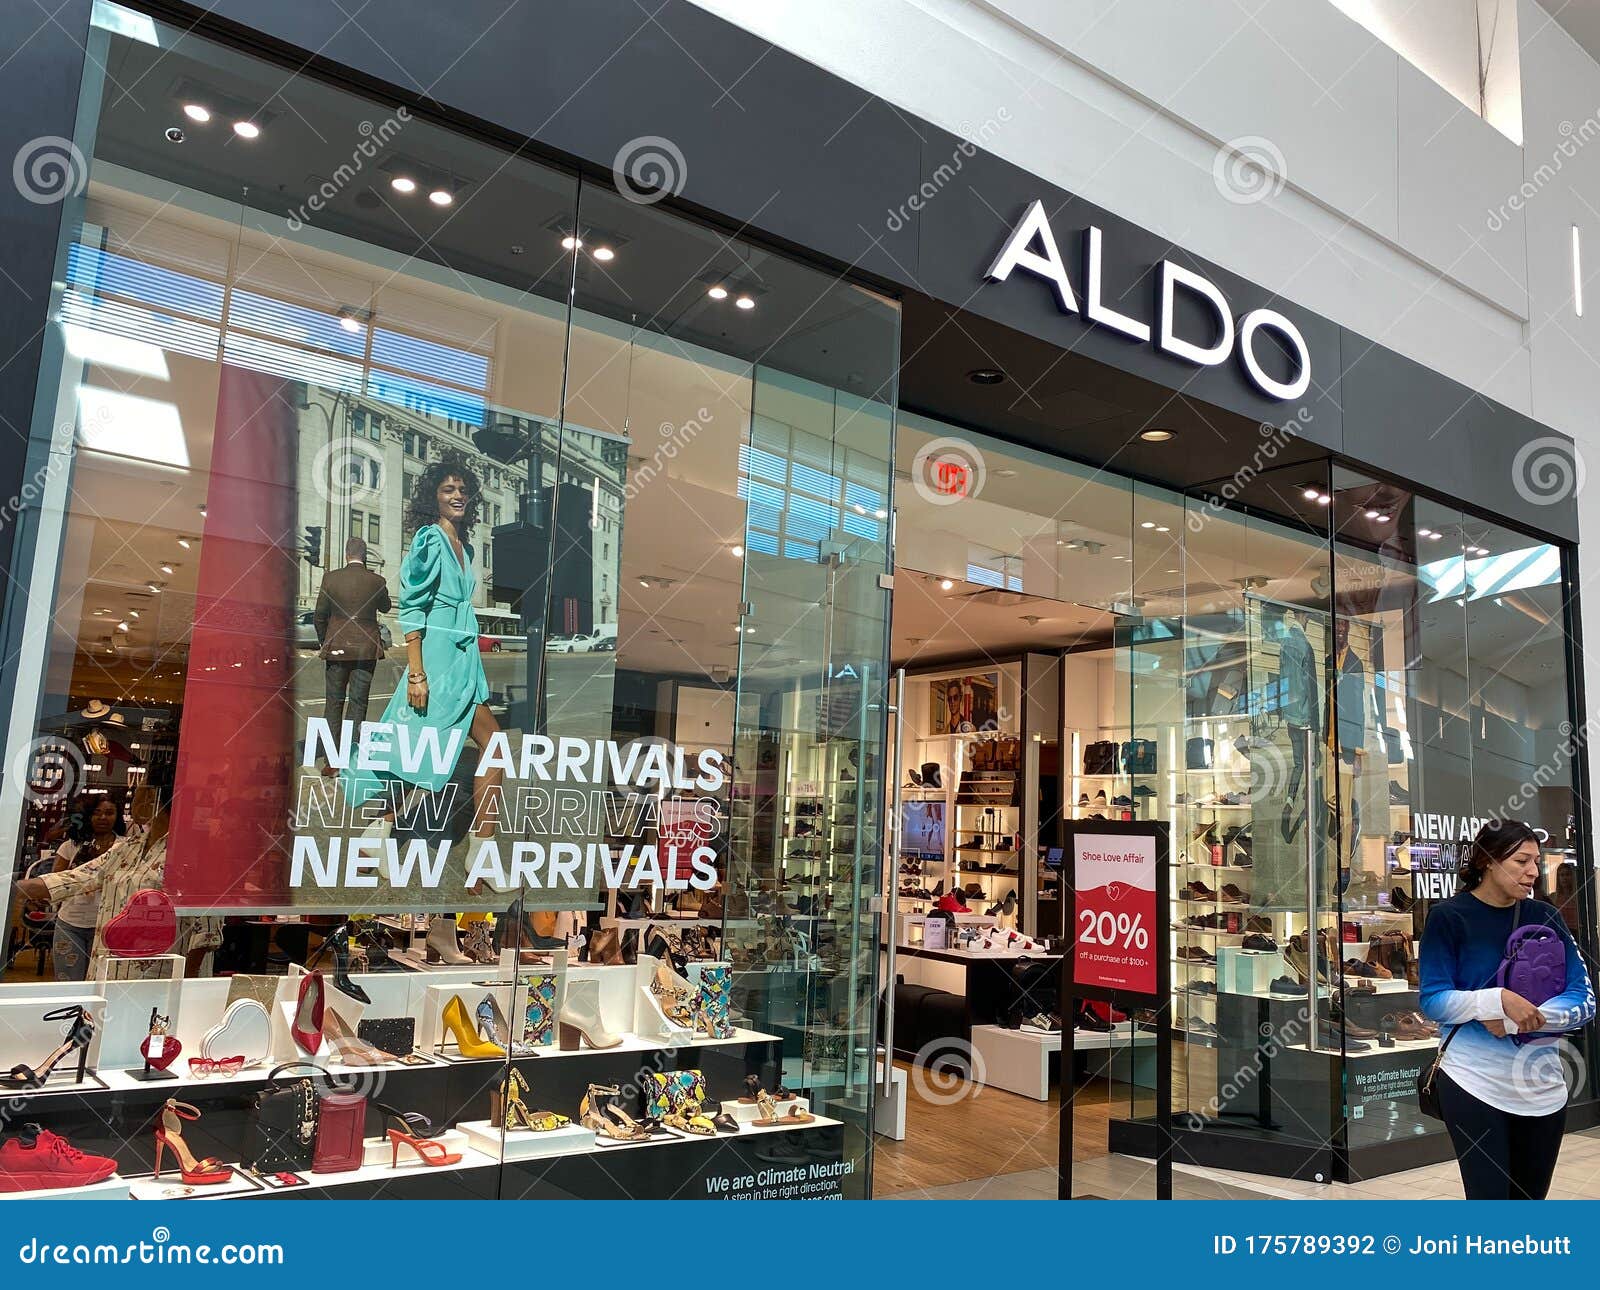 Aldo Retail Fashion Shoes Accessories Store in an Indoor Mall in Orlando, FL Editorial Photography Image of modern, object: 175789392